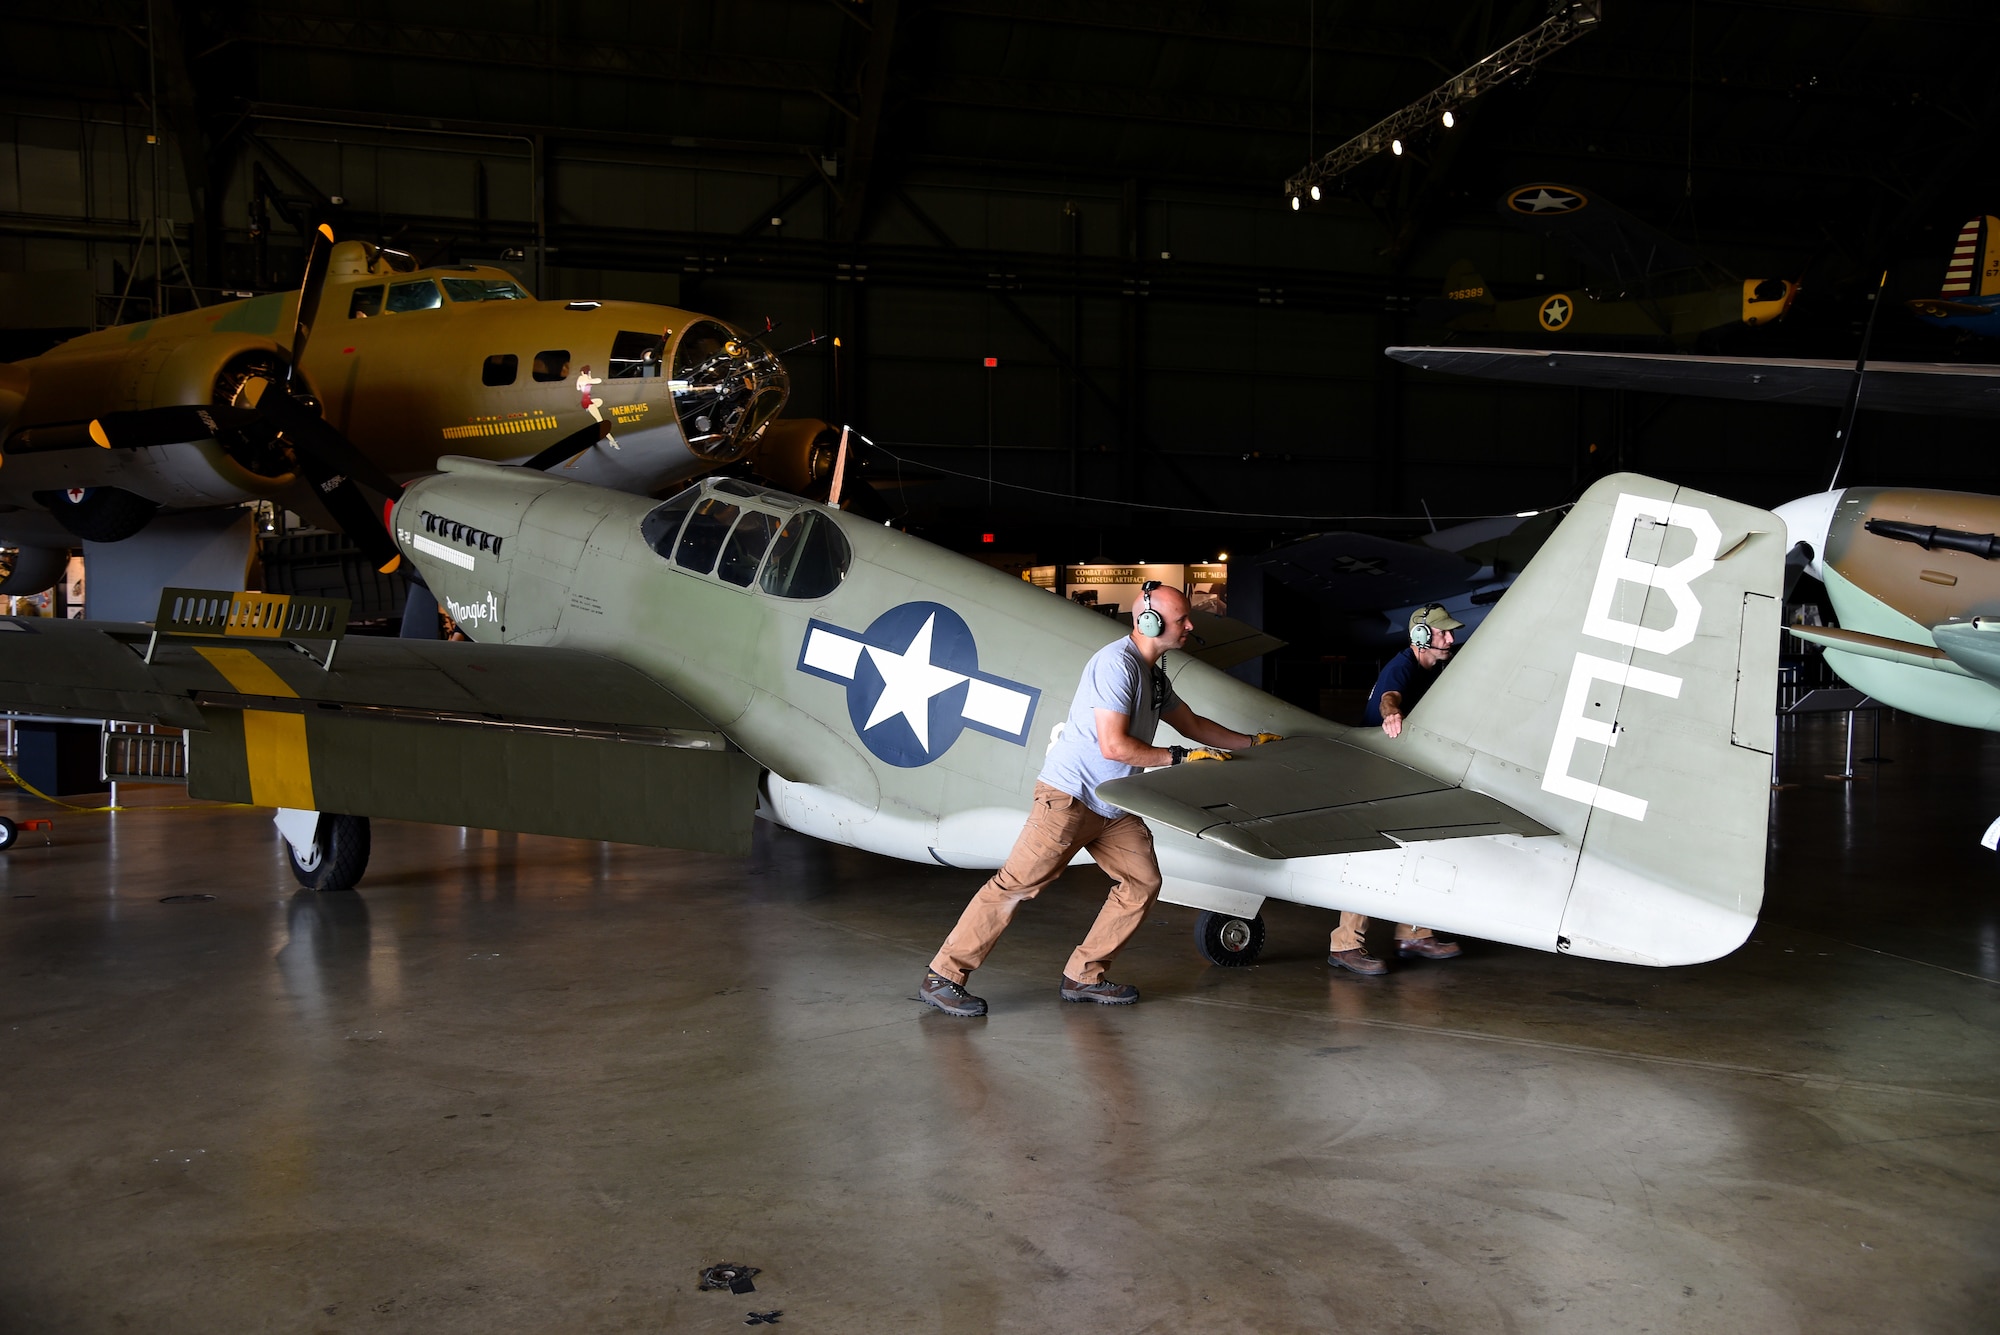 Museum restoration crews move the North American A-36A Mustang back into the WWII Gallery at the National Museum of the U.S. Air Force on Aug. 13, 2018. Several WWII era aircraft were temporarily placed throughout the museum to provide adequate space for the Memphis Belle exhibit opening events. (U.S. Air Force photo by Ken LaRock)